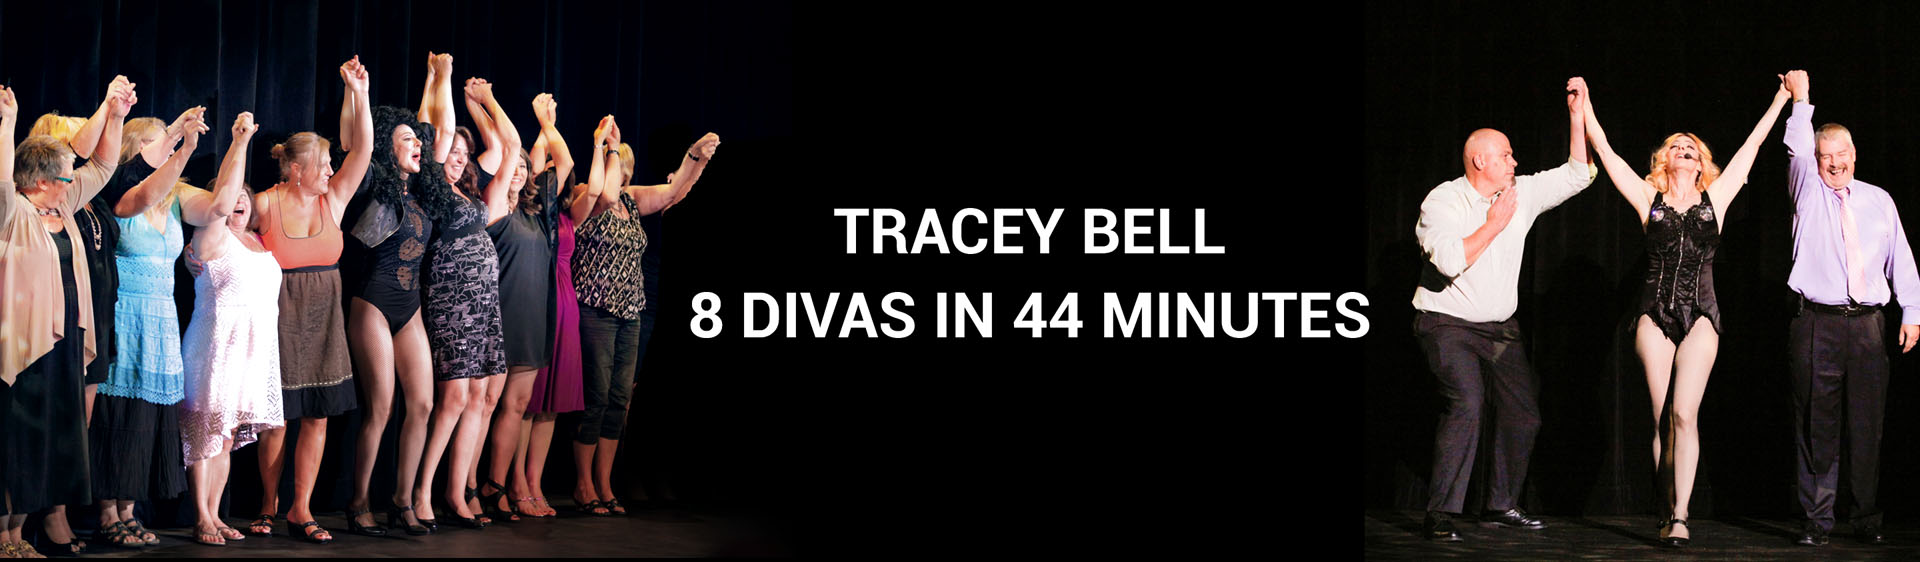 Tracey Bell - 8 Divas in 44 Minutes